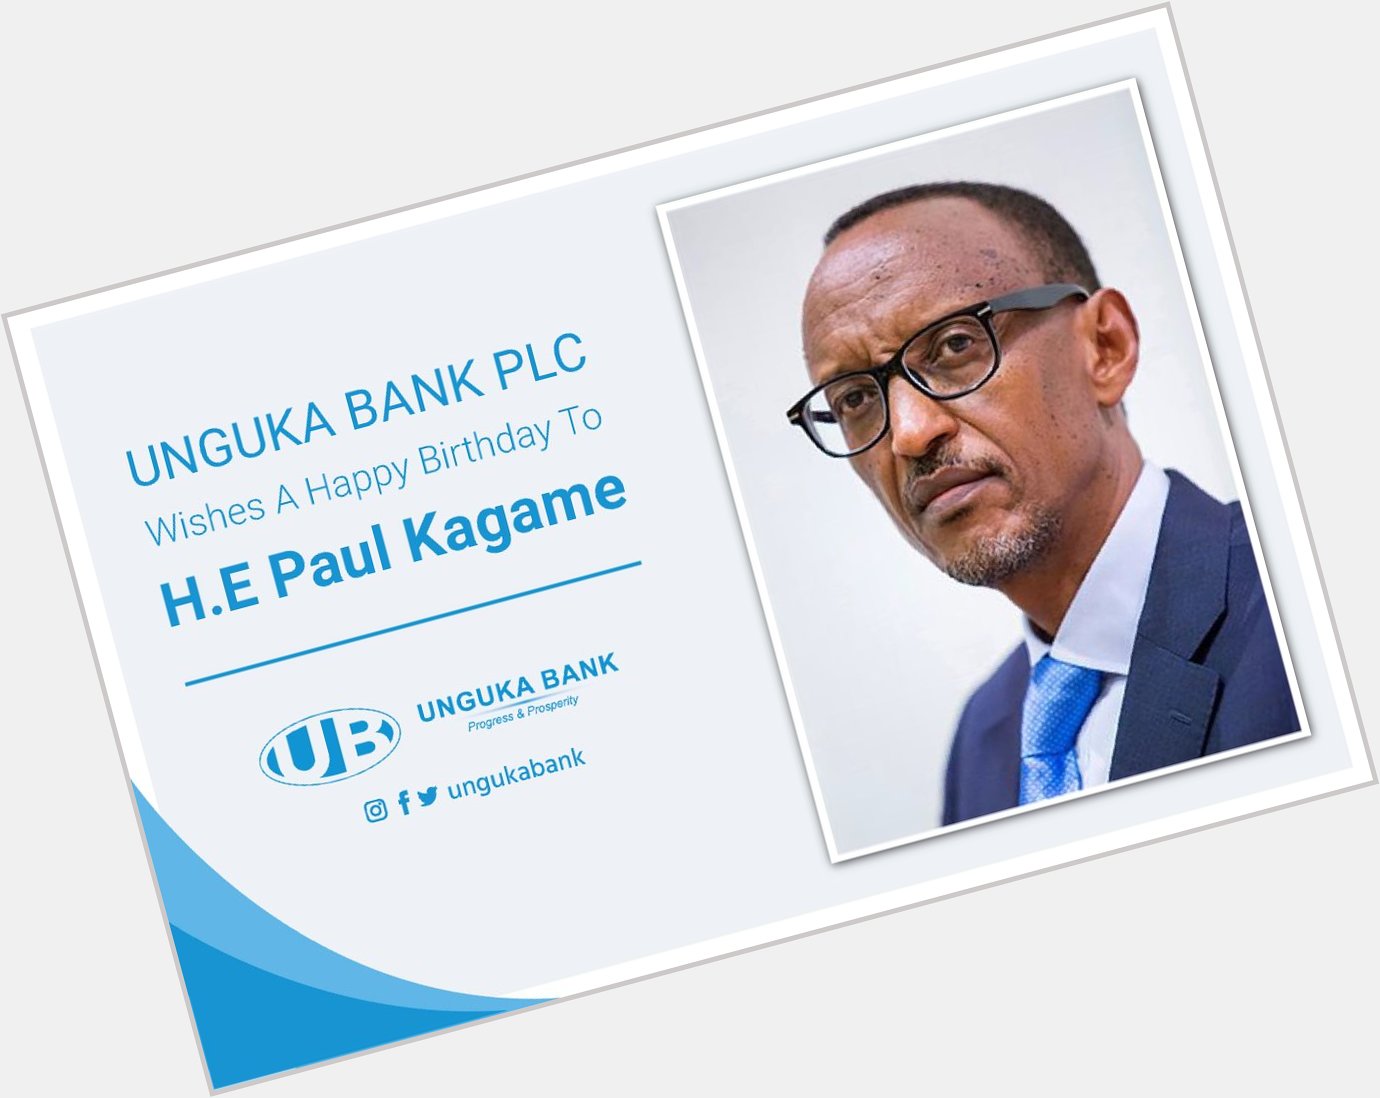 Unguka Bank PLC
Wishes A Happy Birthday To
H.E Paul Kagame. 